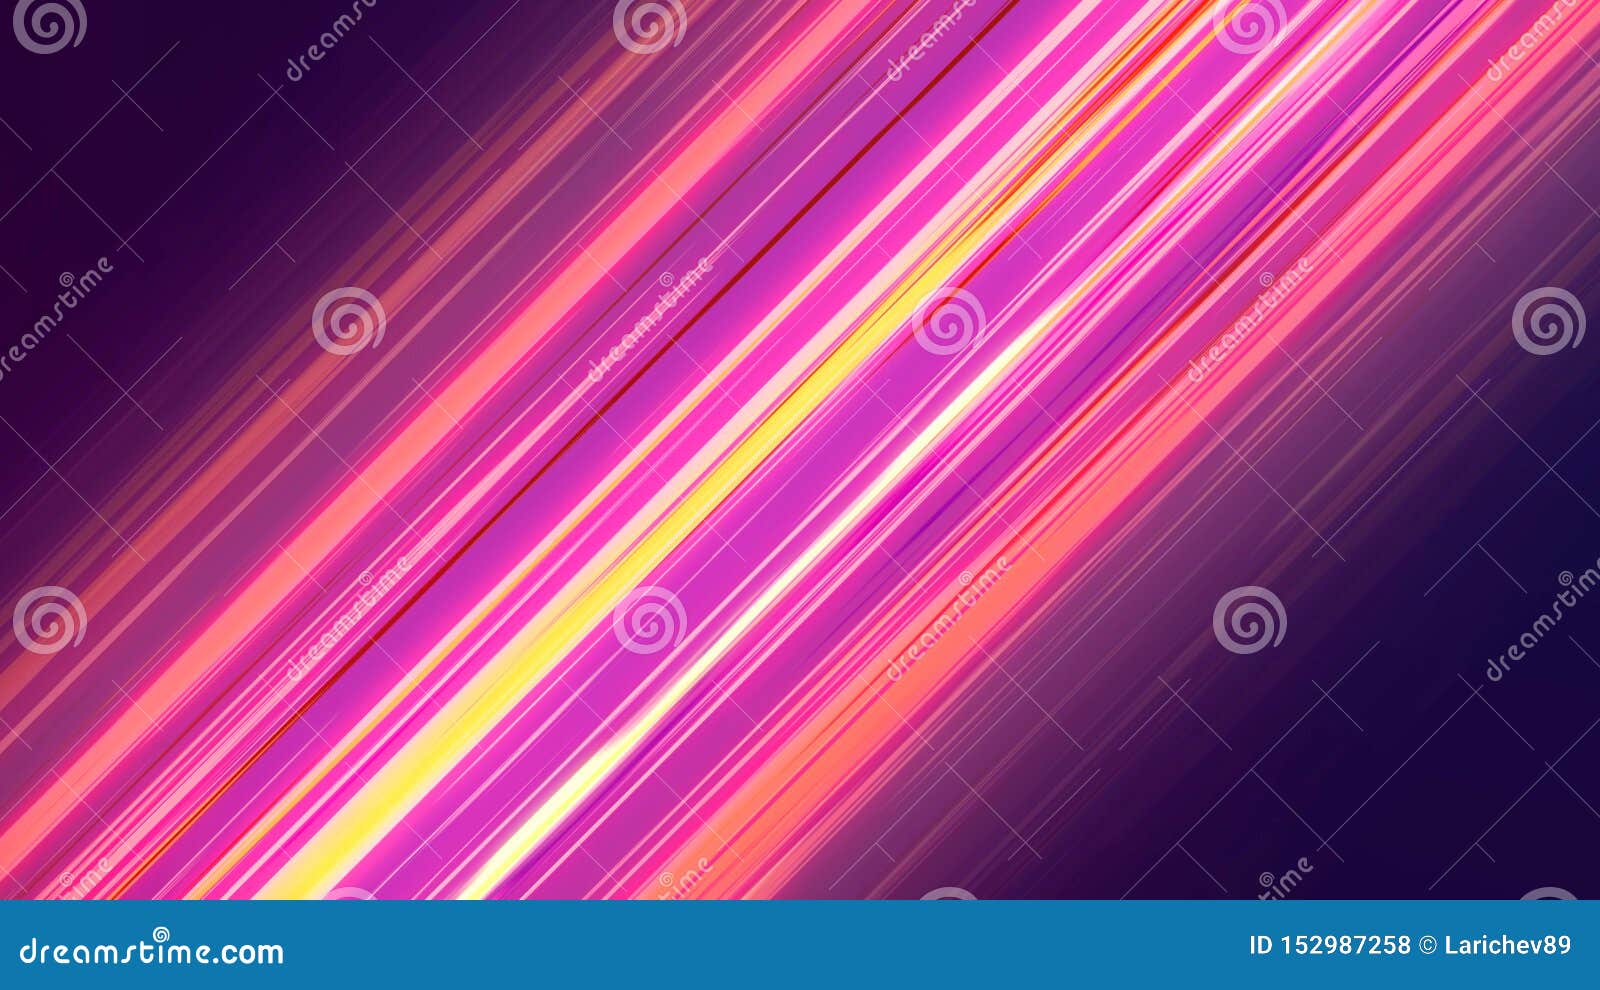 Speed Colorful 3d Illustration Abstract Anime Background Stock Illustration  - Illustration of bright, gold: 152987258